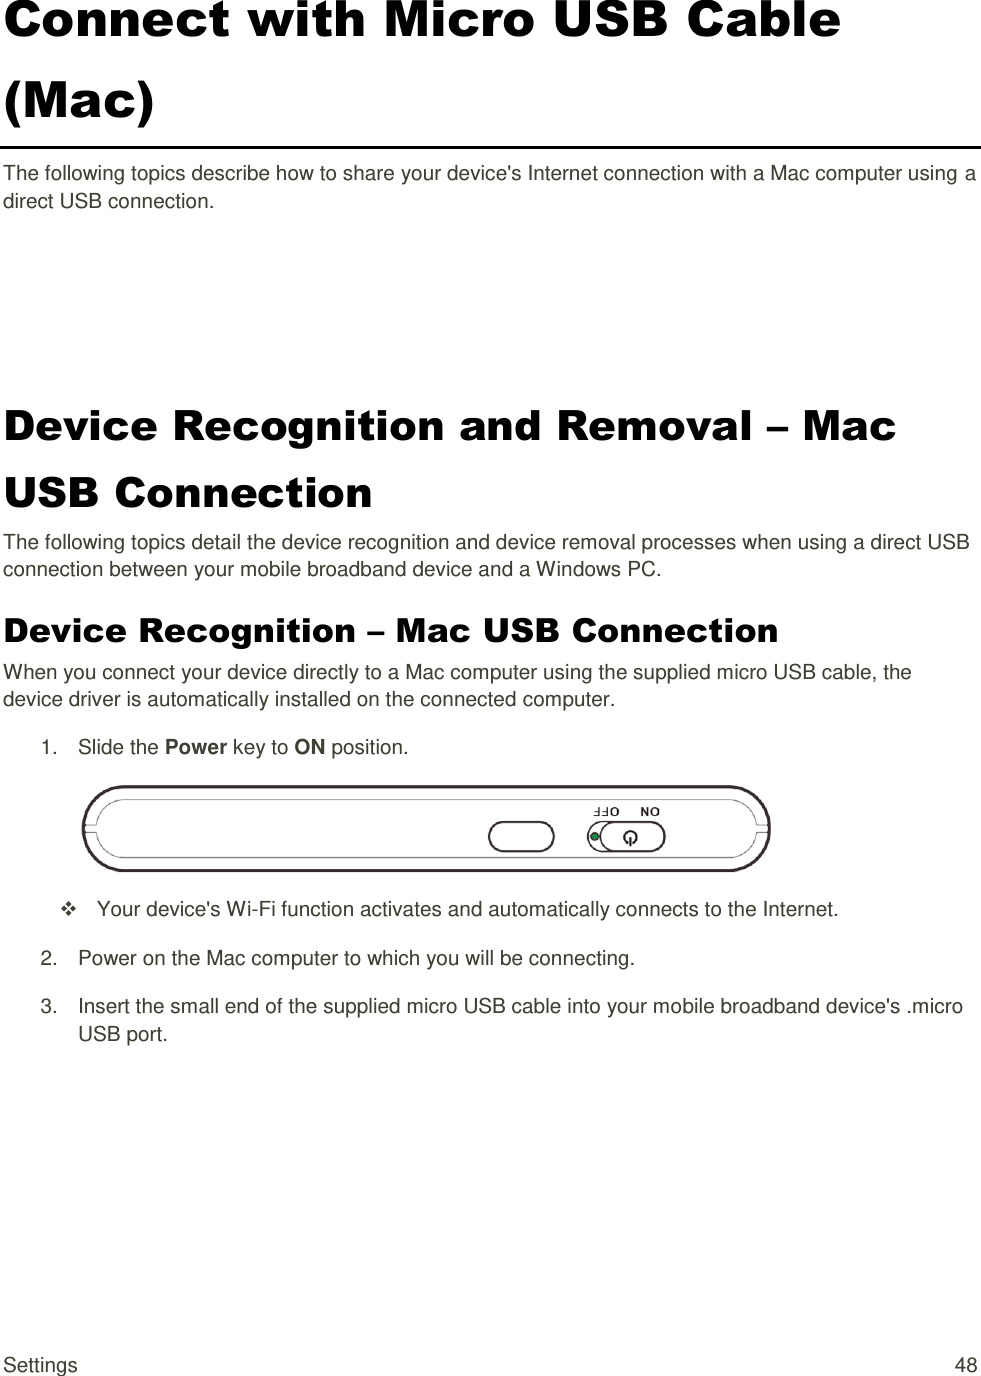 Settings  48 Connect with Micro USB Cable (Mac) The following topics describe how to share your device&apos;s Internet connection with a Mac computer using a direct USB connection. Device Recognition and Removal – Mac USB Connection The following topics detail the device recognition and device removal processes when using a direct USB connection between your mobile broadband device and a Windows PC. Device Recognition – Mac USB Connection When you connect your device directly to a Mac computer using the supplied micro USB cable, the device driver is automatically installed on the connected computer. 1.  Slide the Power key to ON position.    Your device&apos;s Wi-Fi function activates and automatically connects to the Internet. 2.  Power on the Mac computer to which you will be connecting. 3.  Insert the small end of the supplied micro USB cable into your mobile broadband device&apos;s .micro USB port. 